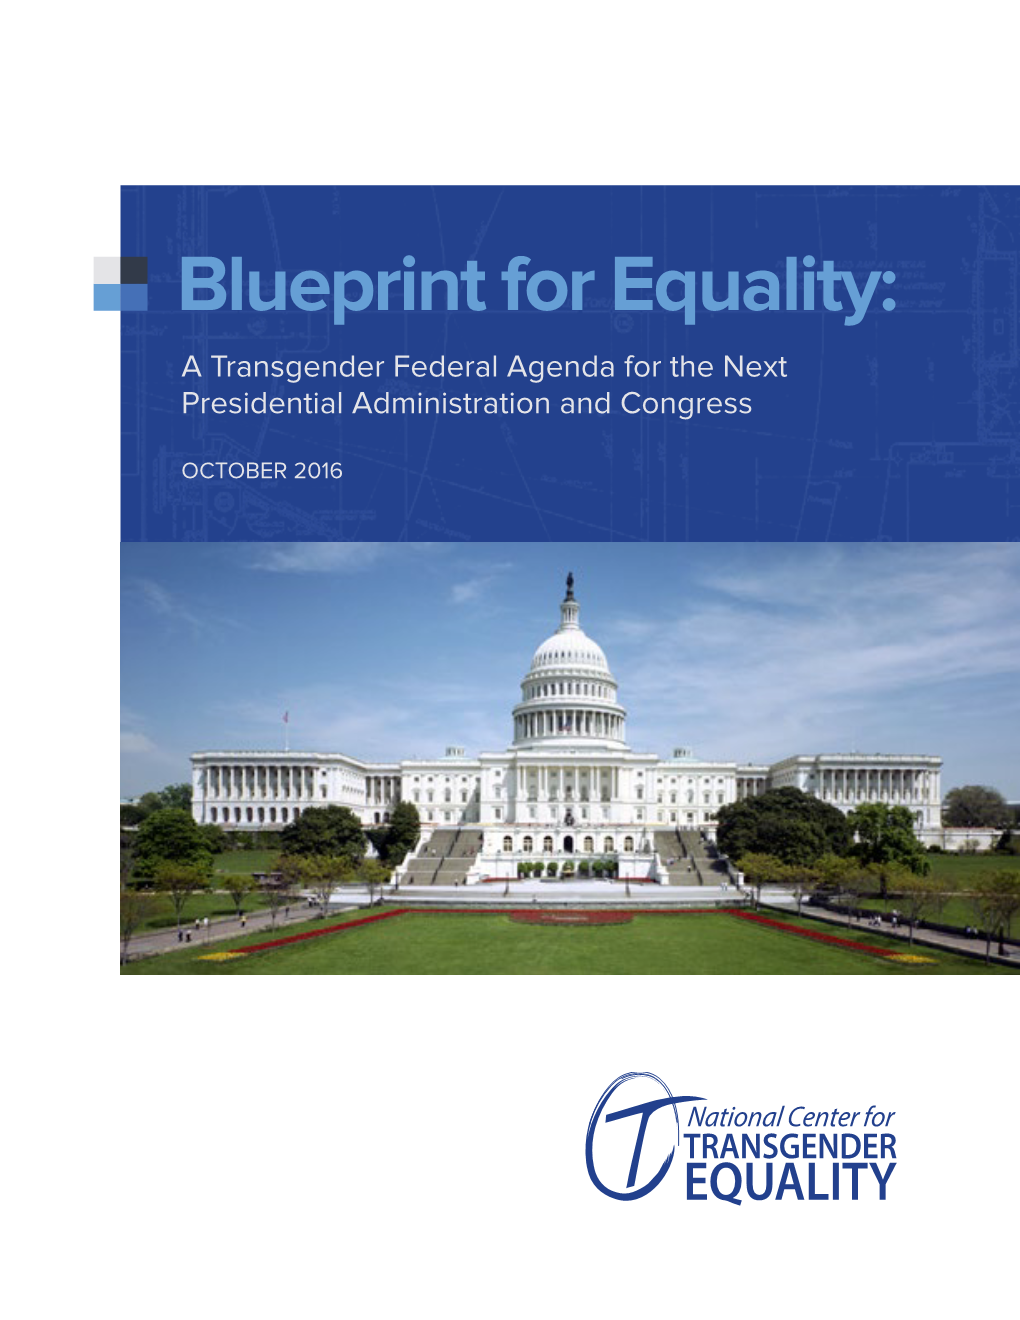 Blueprint for Equality: a Transgender Federal Agenda for the Next Presidential Administration and Congress